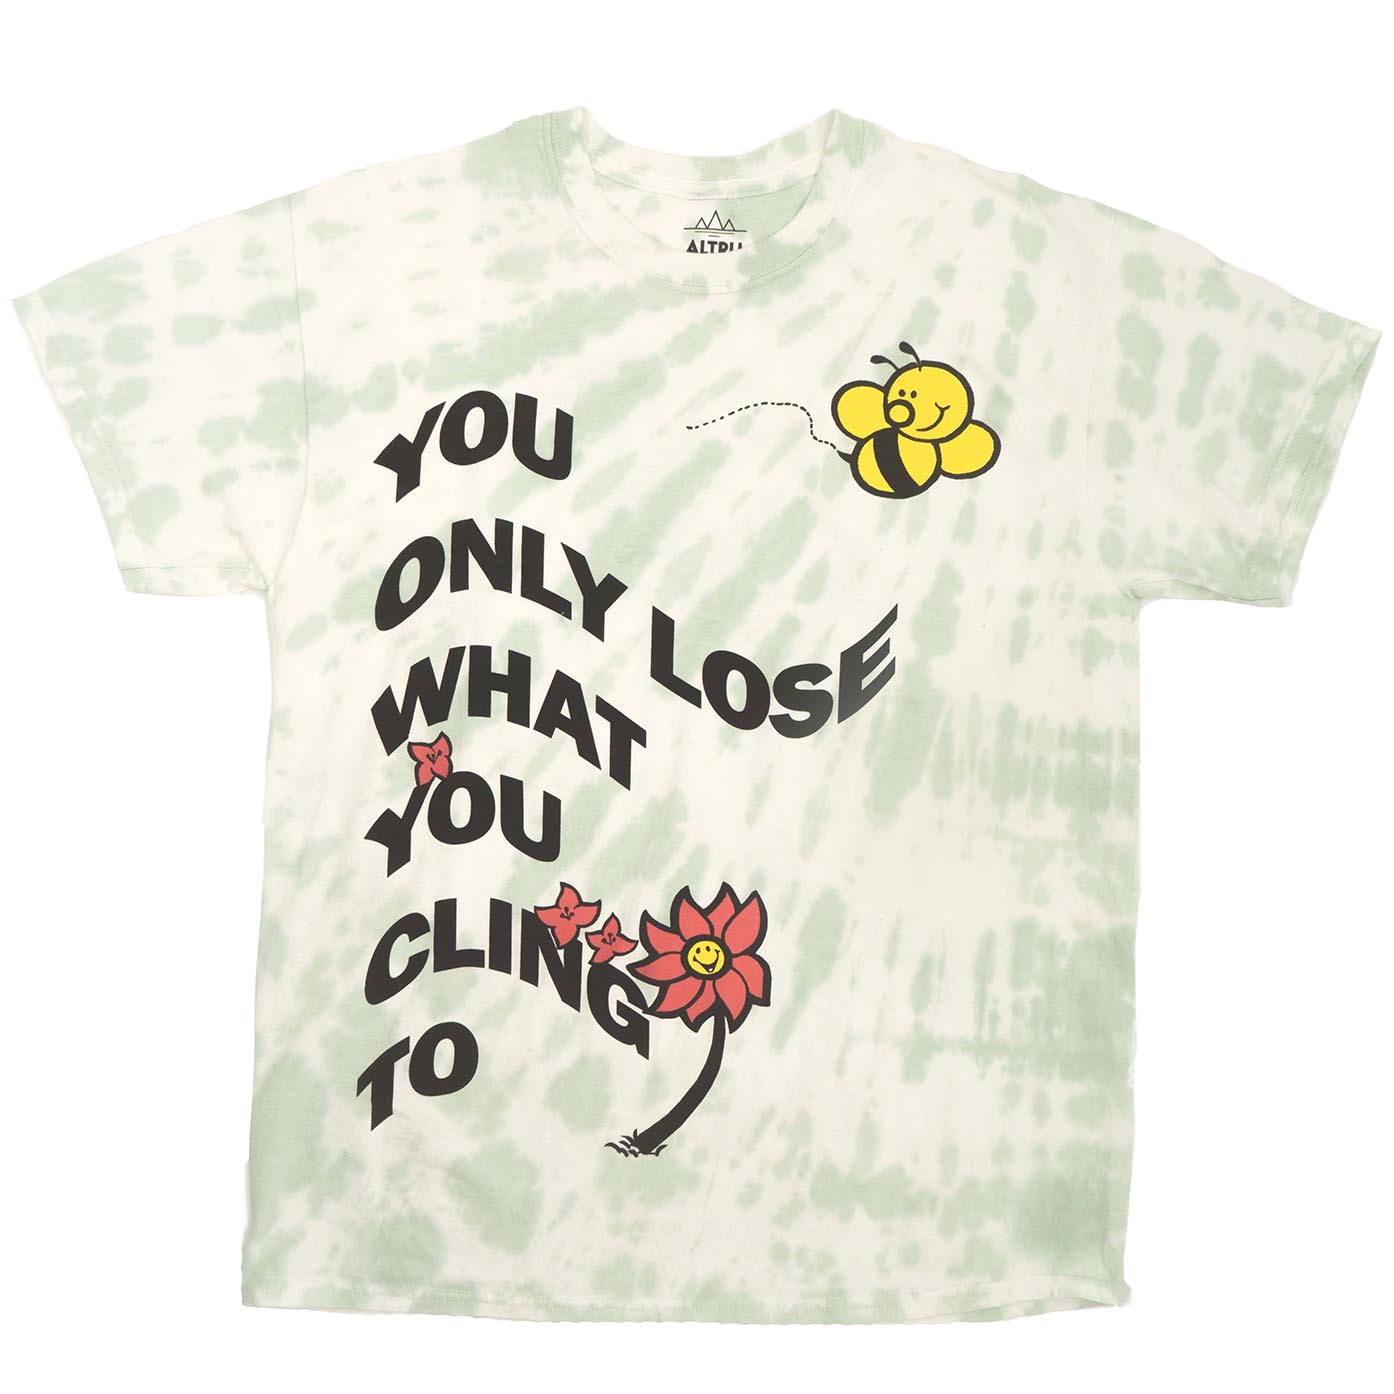 Only Lose What You Cling To Men's tee. Green and white tie dye with graphic of bee and flower and motivational text screen printed on front. Front full photo.